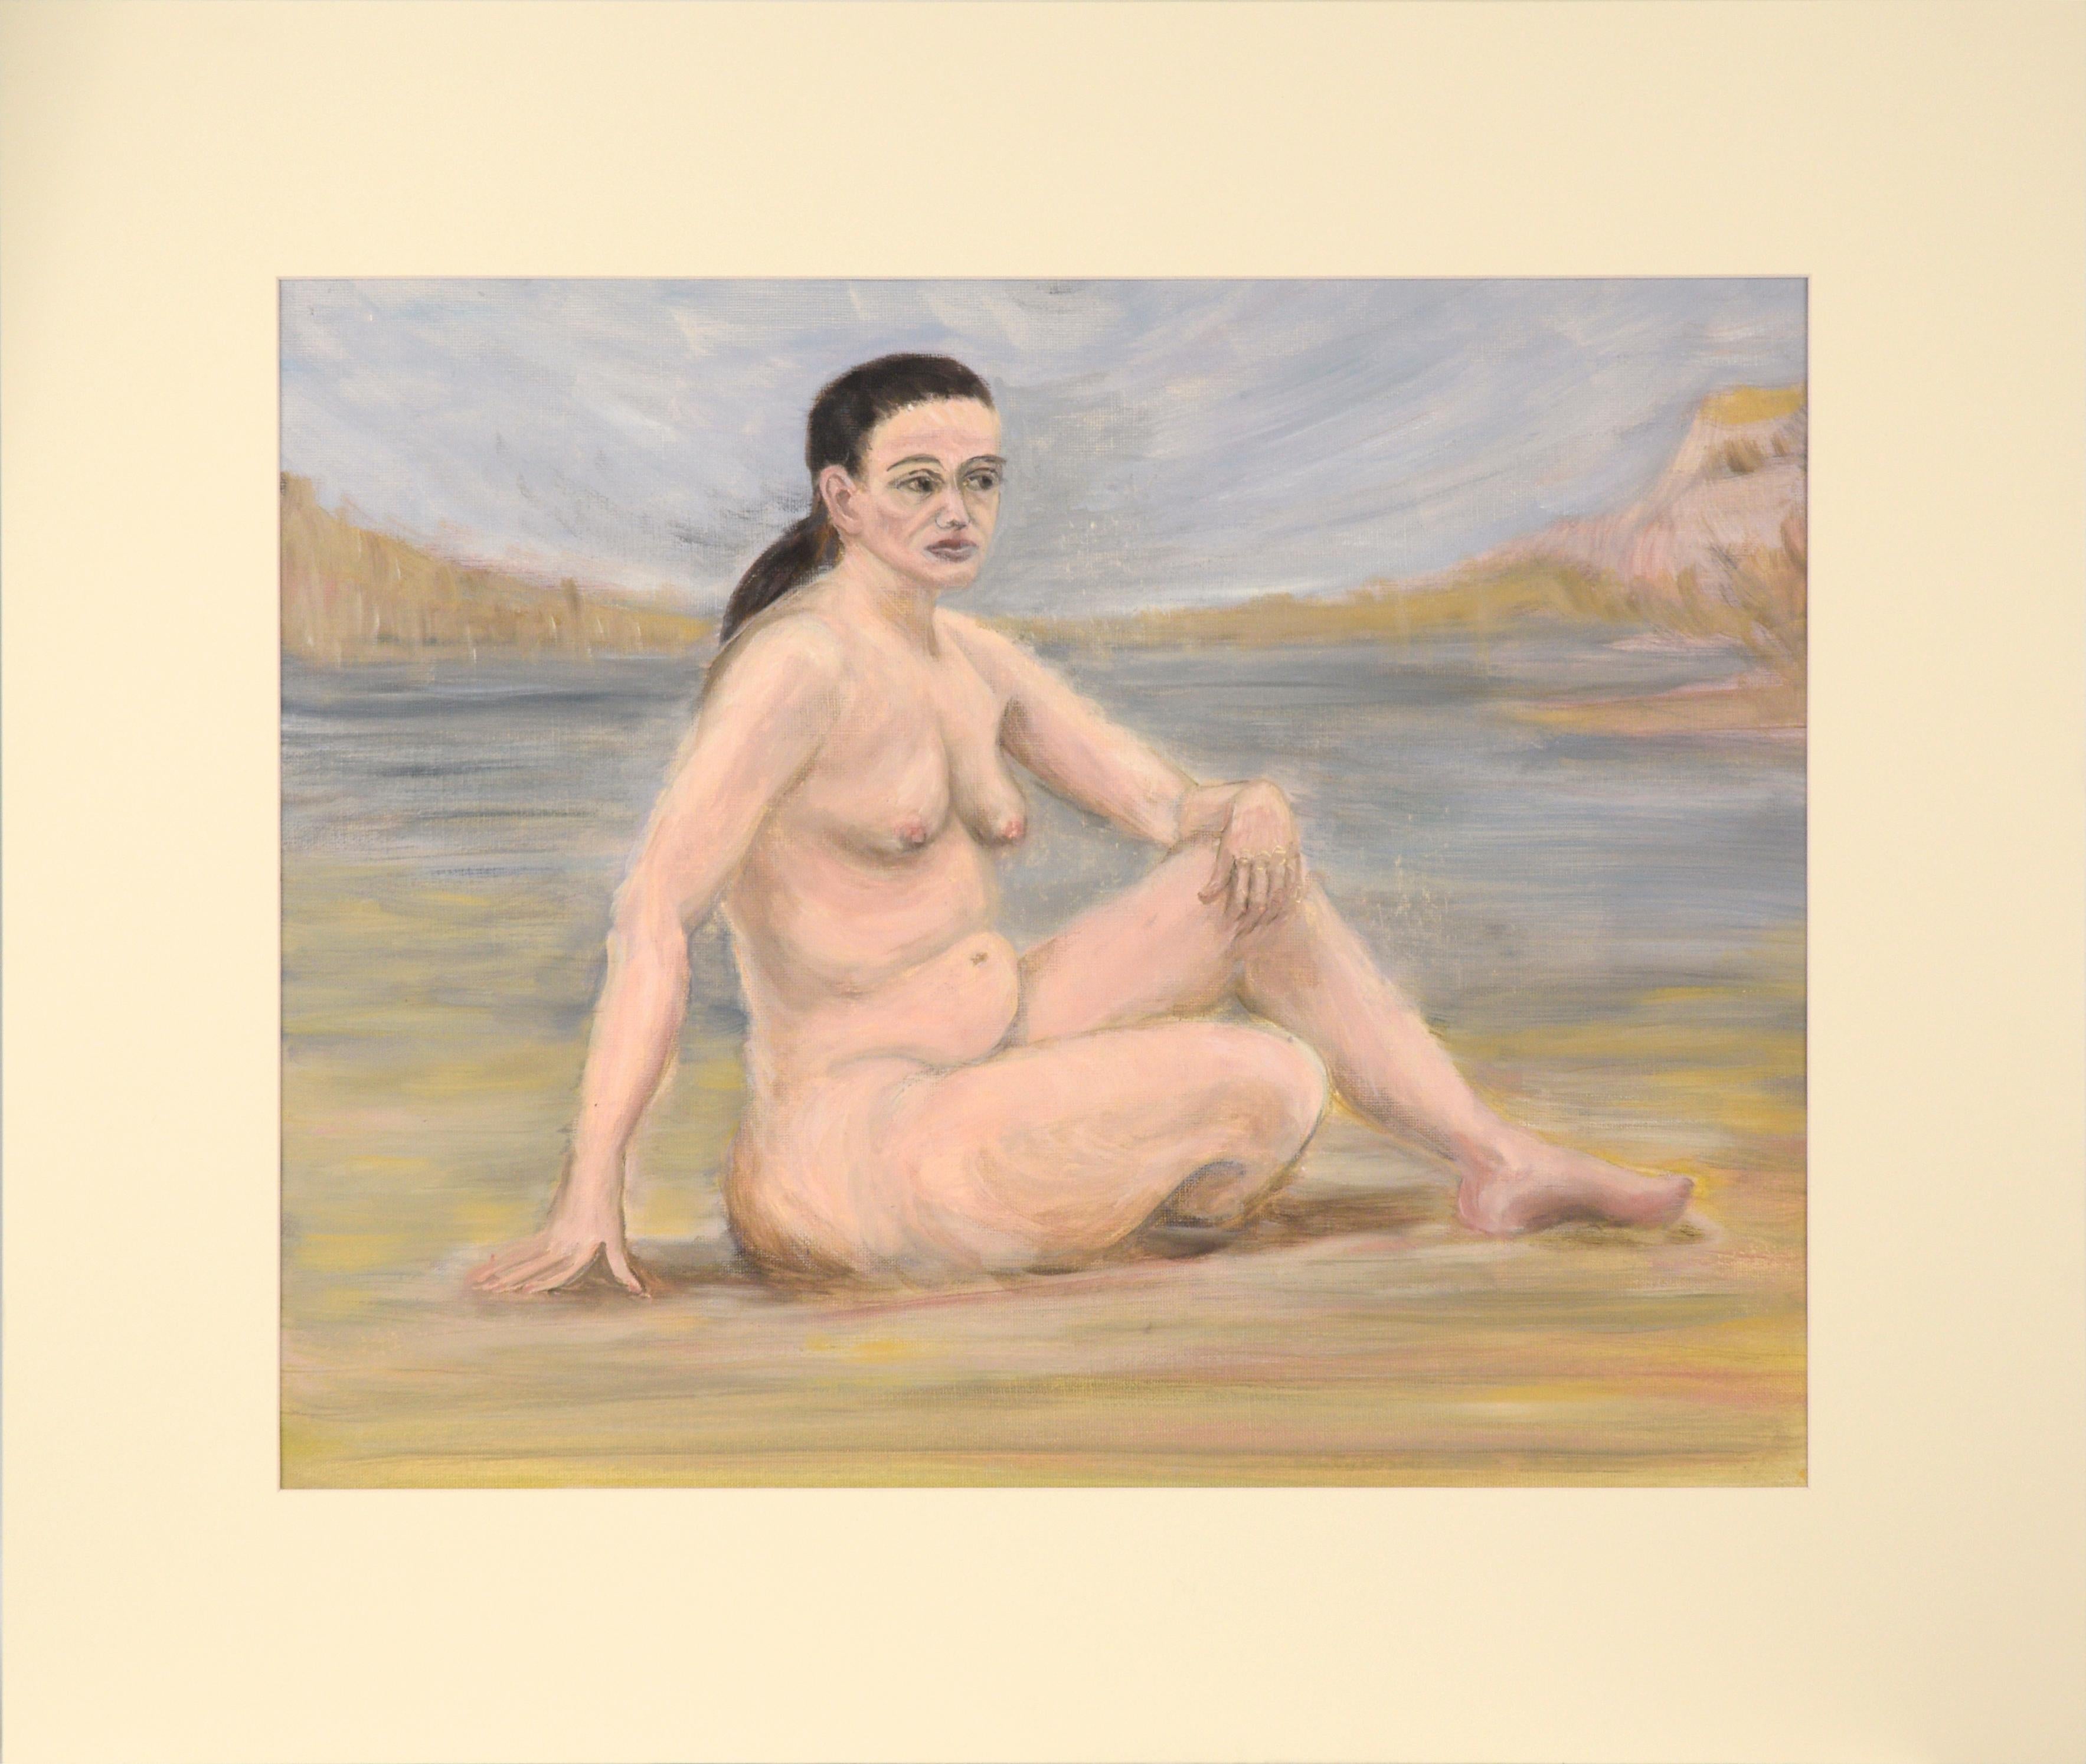 Woman at the Lake, Mid Century Bay Area Nude Figure Study 